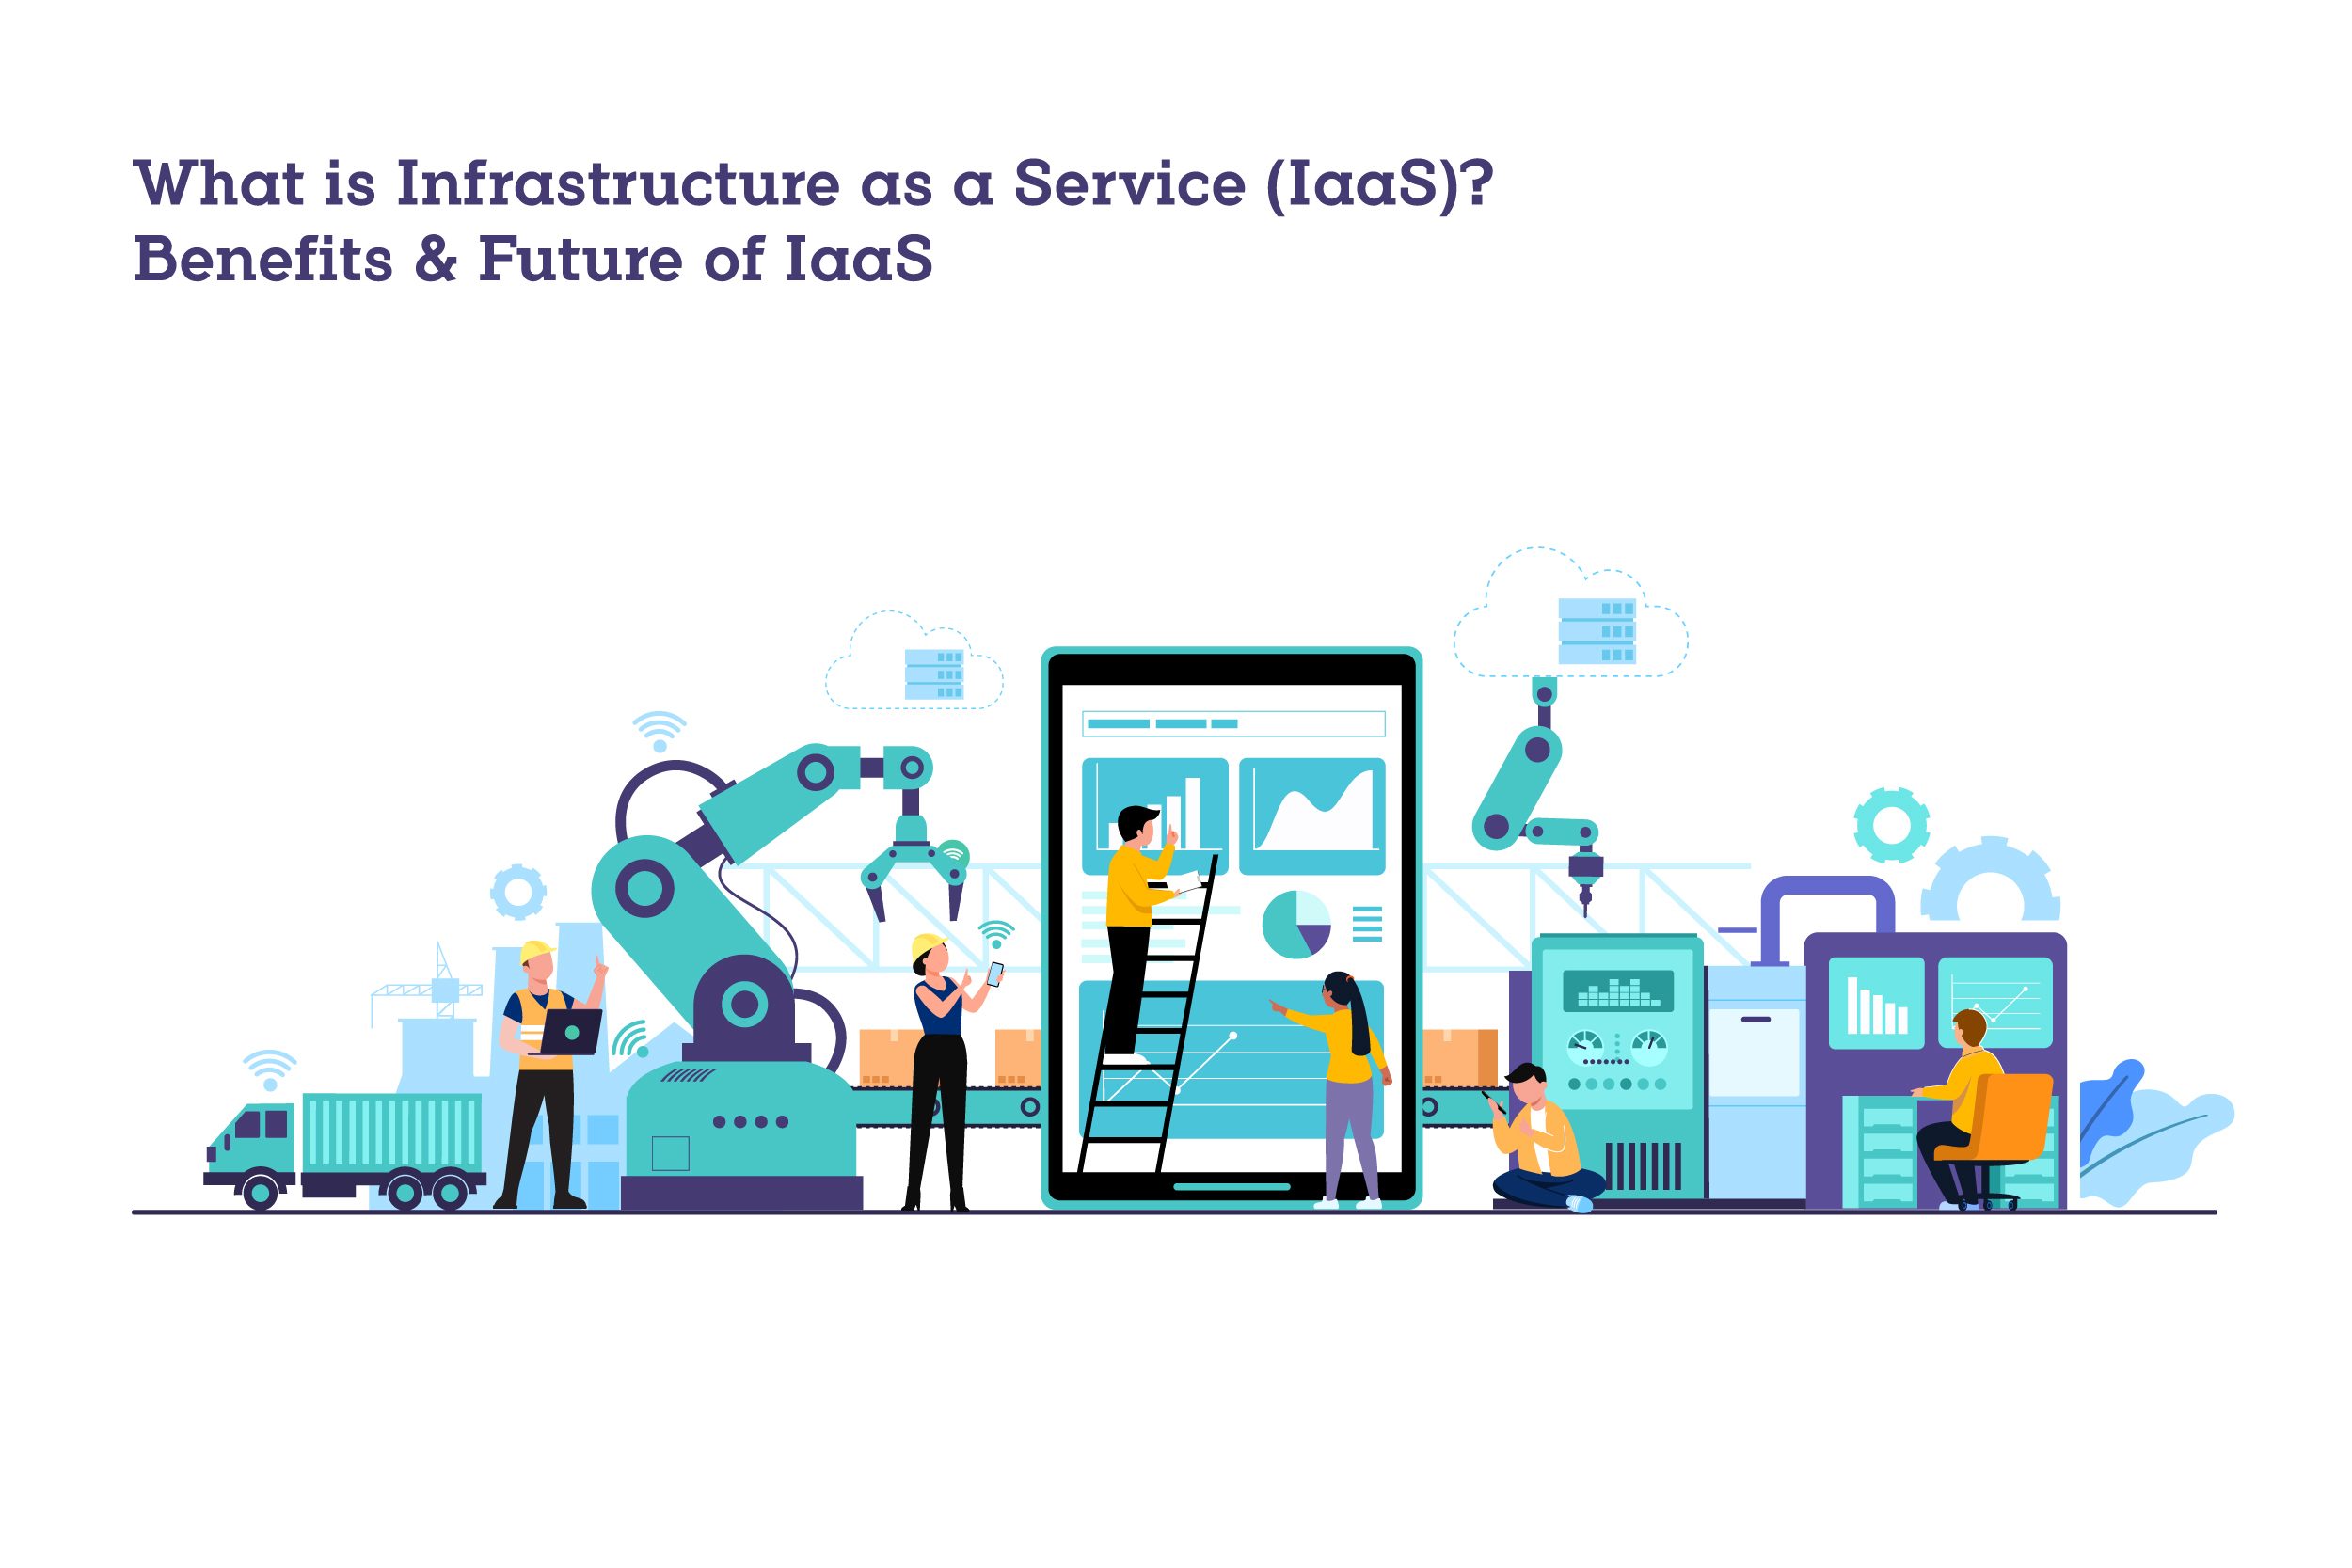 What is Infrastructure as a Service (IaaS)? Benefits of Infrastructure as a Service (IaaS)